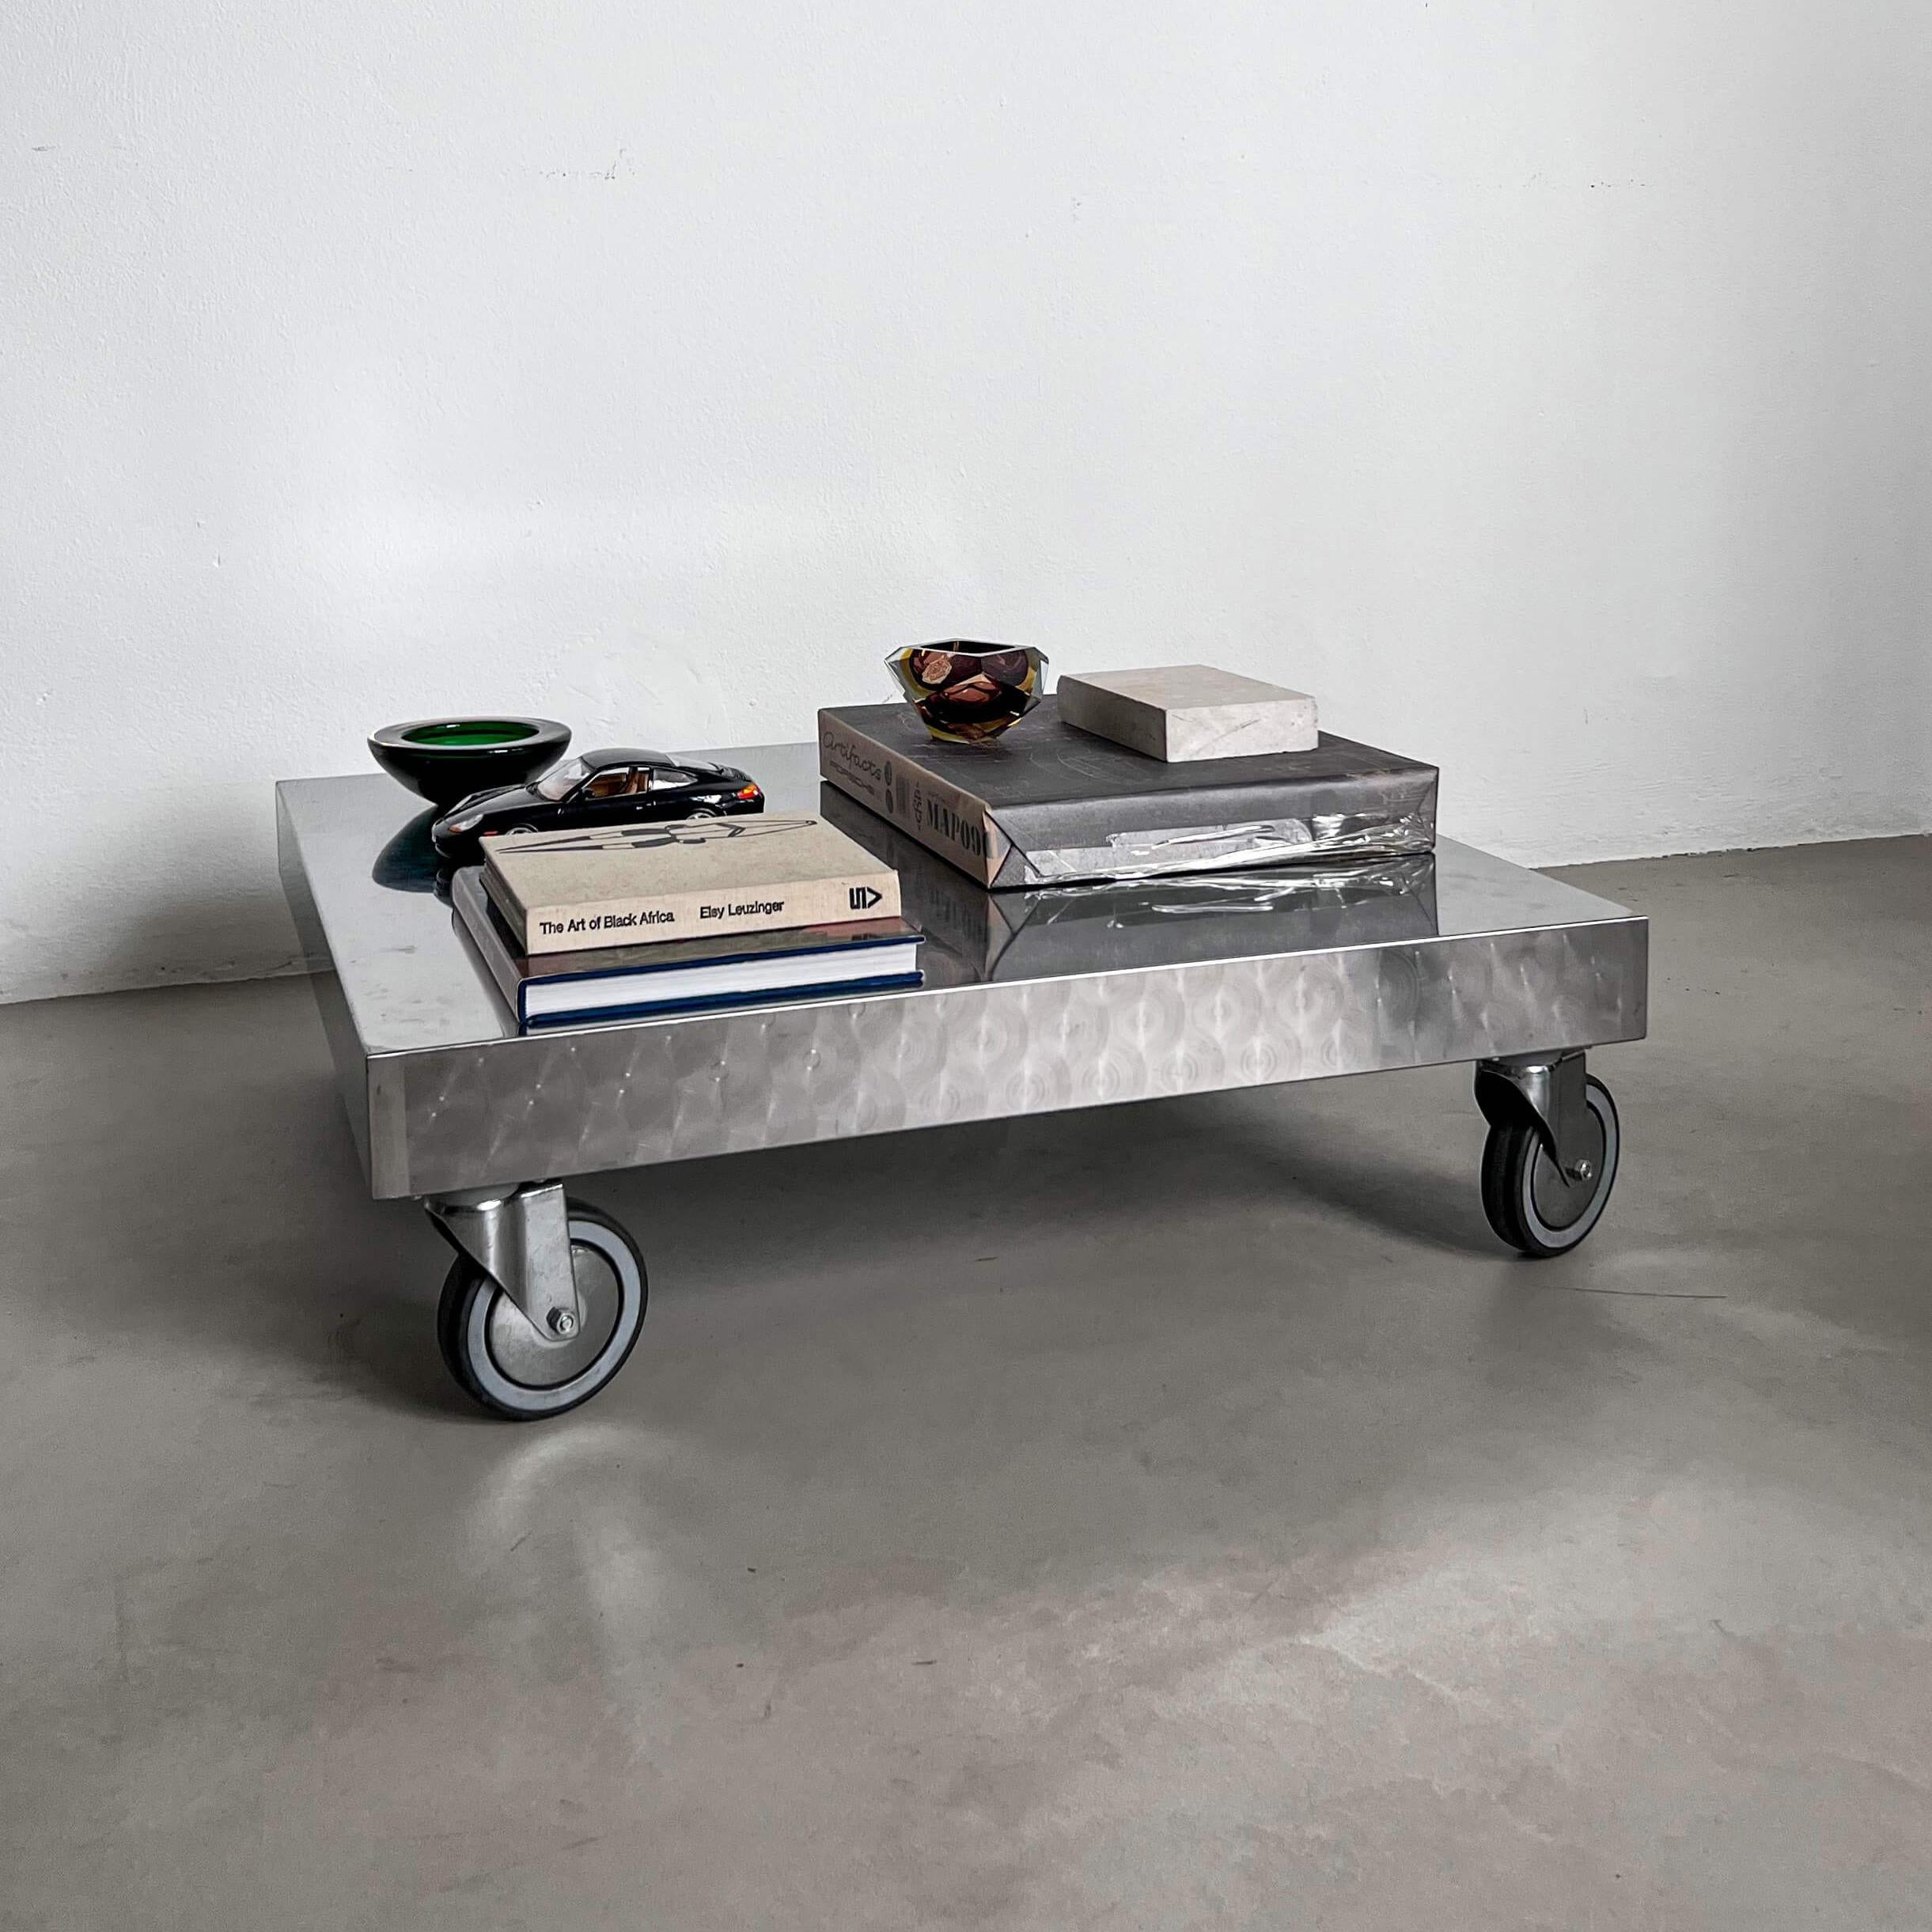 Impressive and attractive stainless steel coffee table with wheels. A sculptural, collectible piece that questions the idea of furniture itself: can a piece that seems to belong in a workshop find a place in a luxury interior? The answer seems to be